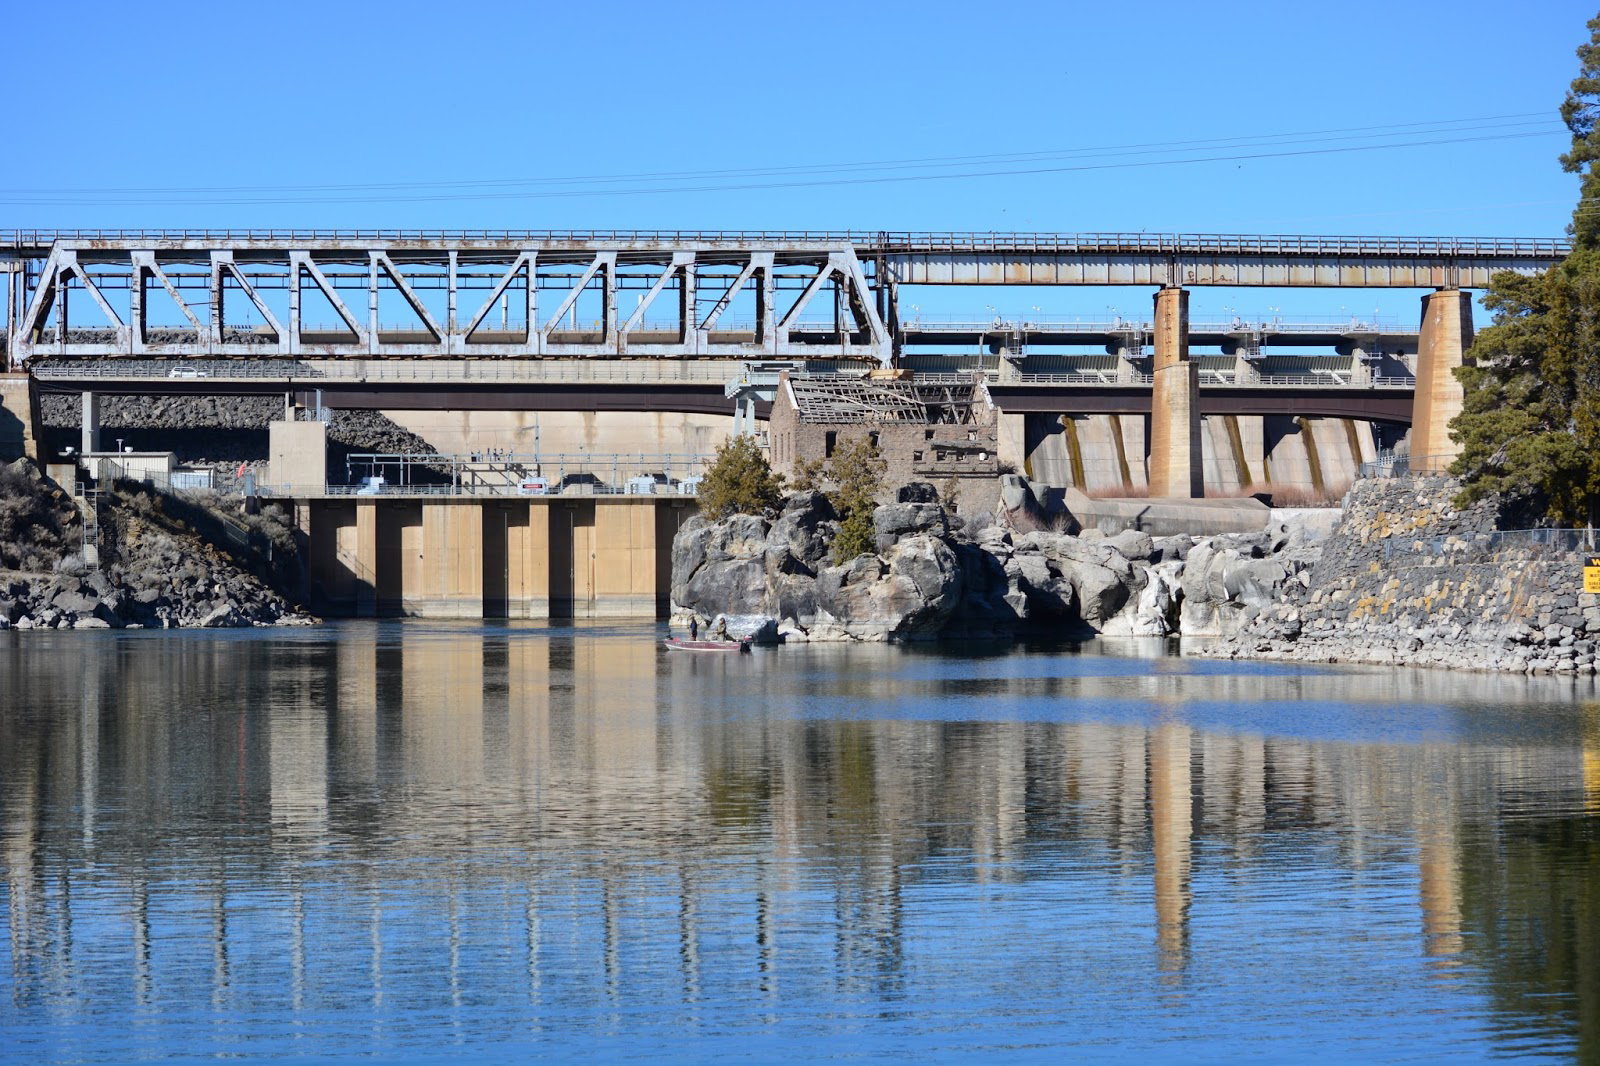 American Falls Dam, Power County, Idaho, viewed from downstream with spillway visible at right below the railroad bridge